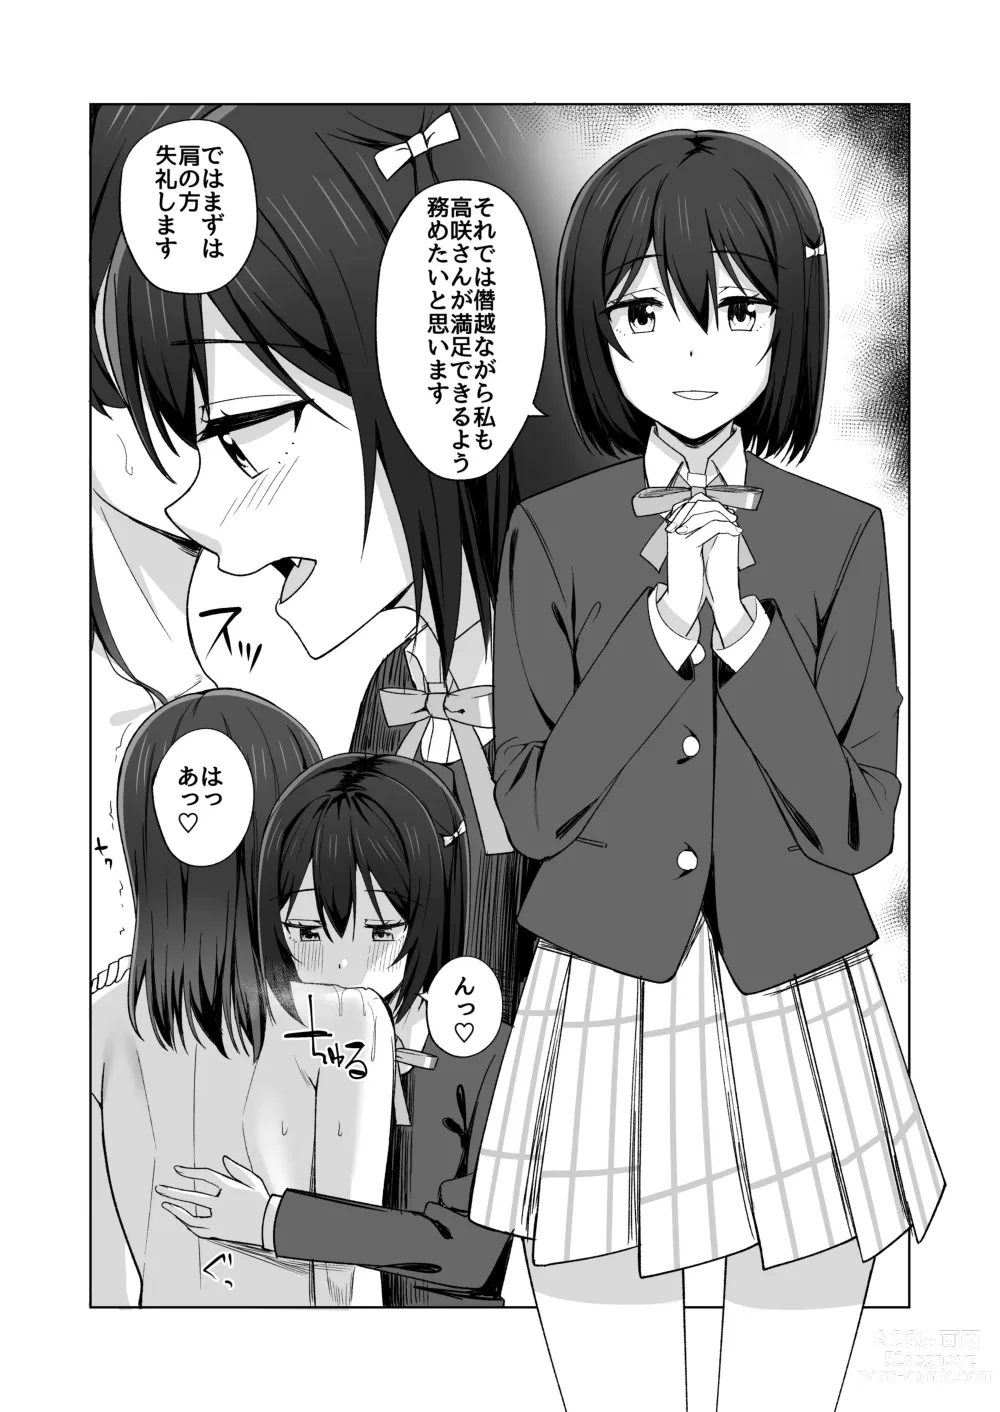 Page 120 of doujinshi Go for dream